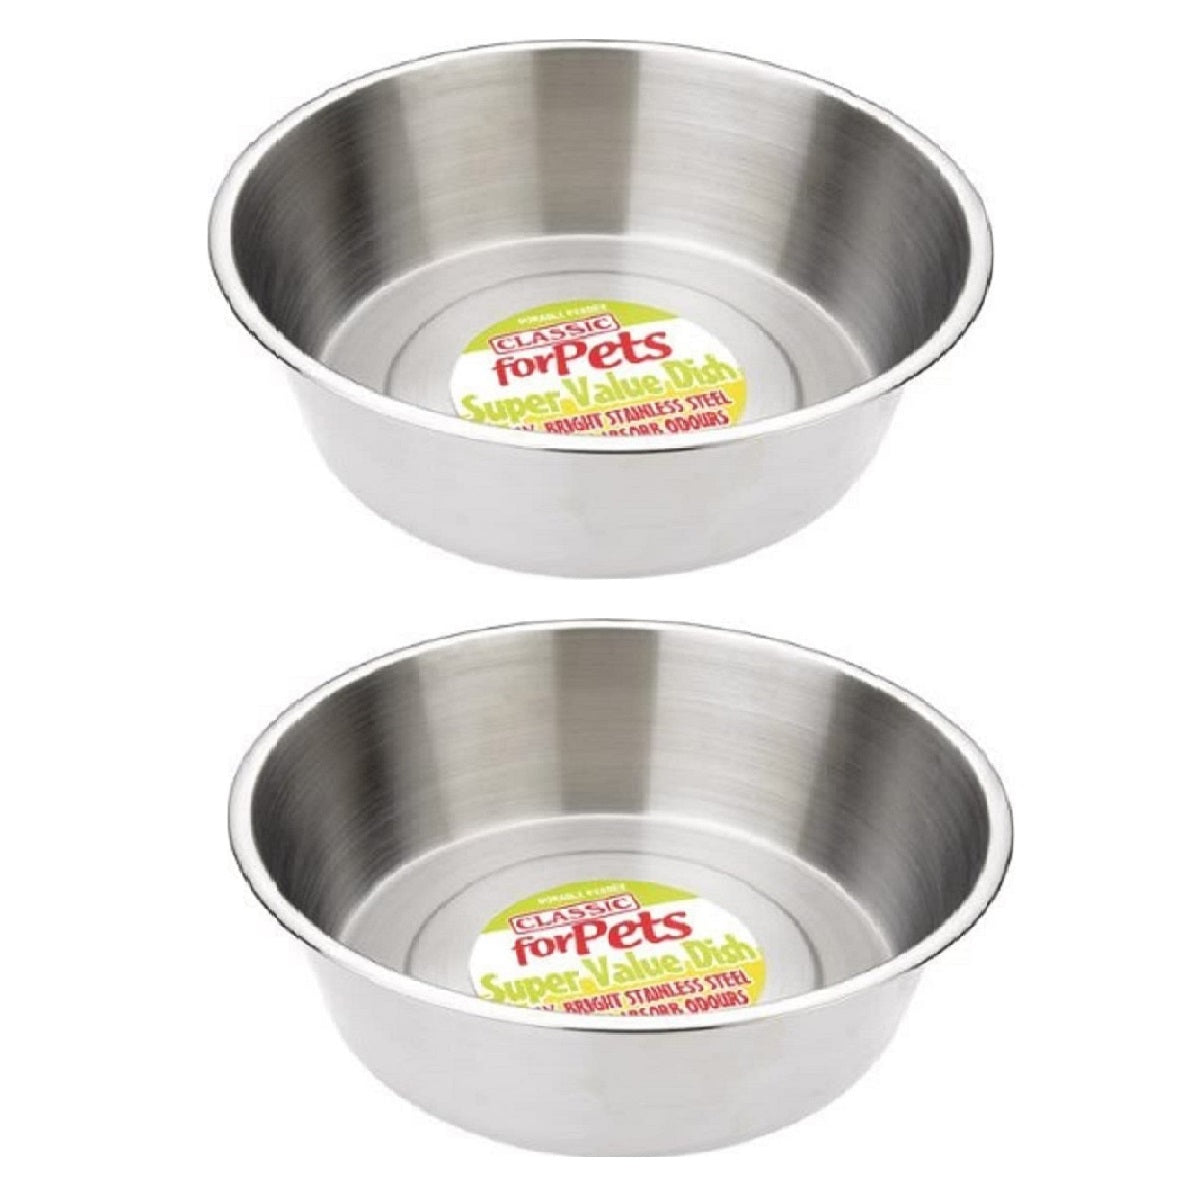 Classic - Stainless Steel Dish